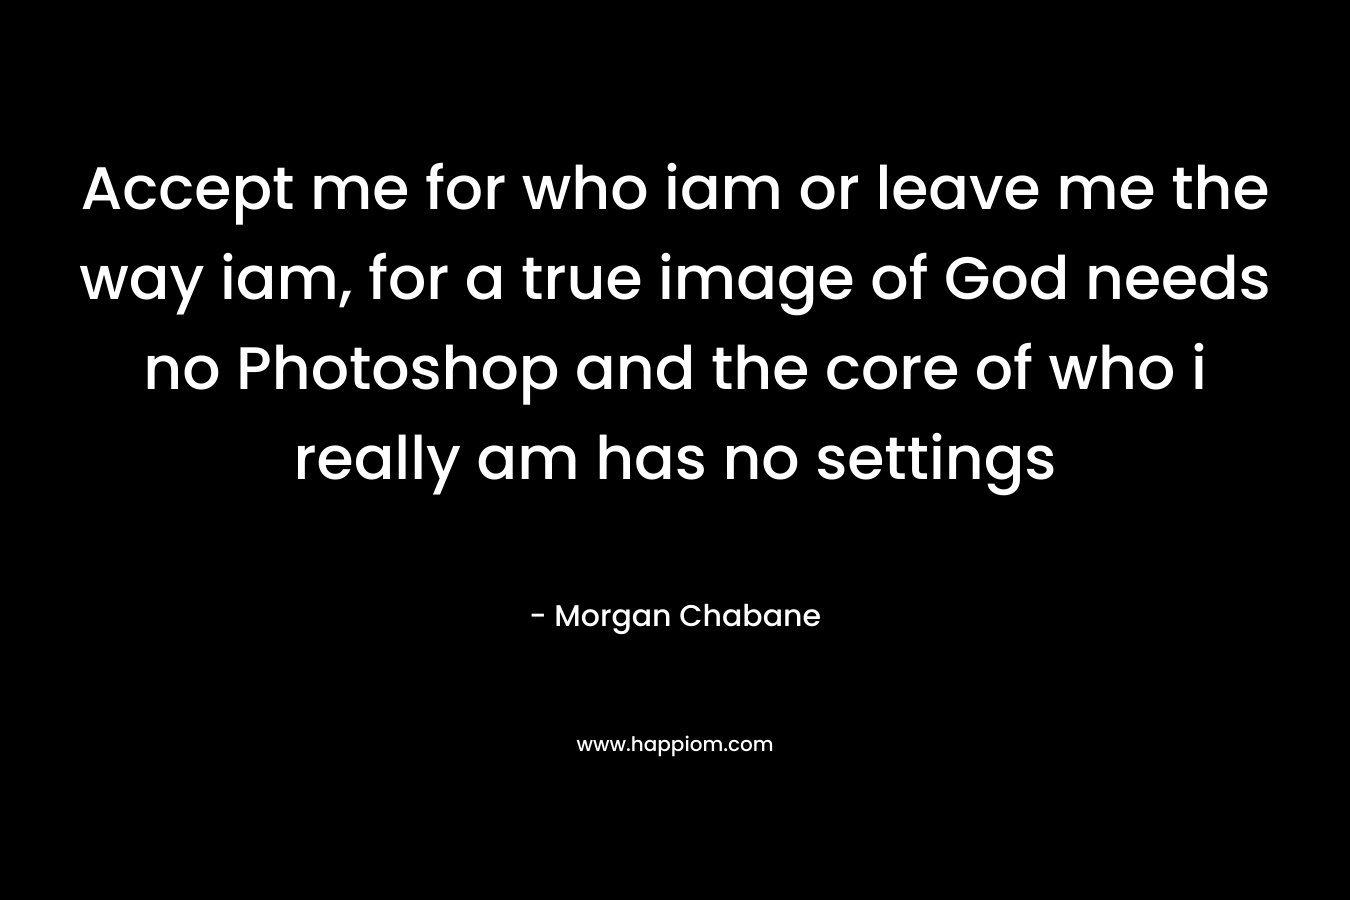 Accept me for who iam or leave me the way iam, for a true image of God needs no Photoshop and the core of who i really am has no settings – Morgan Chabane